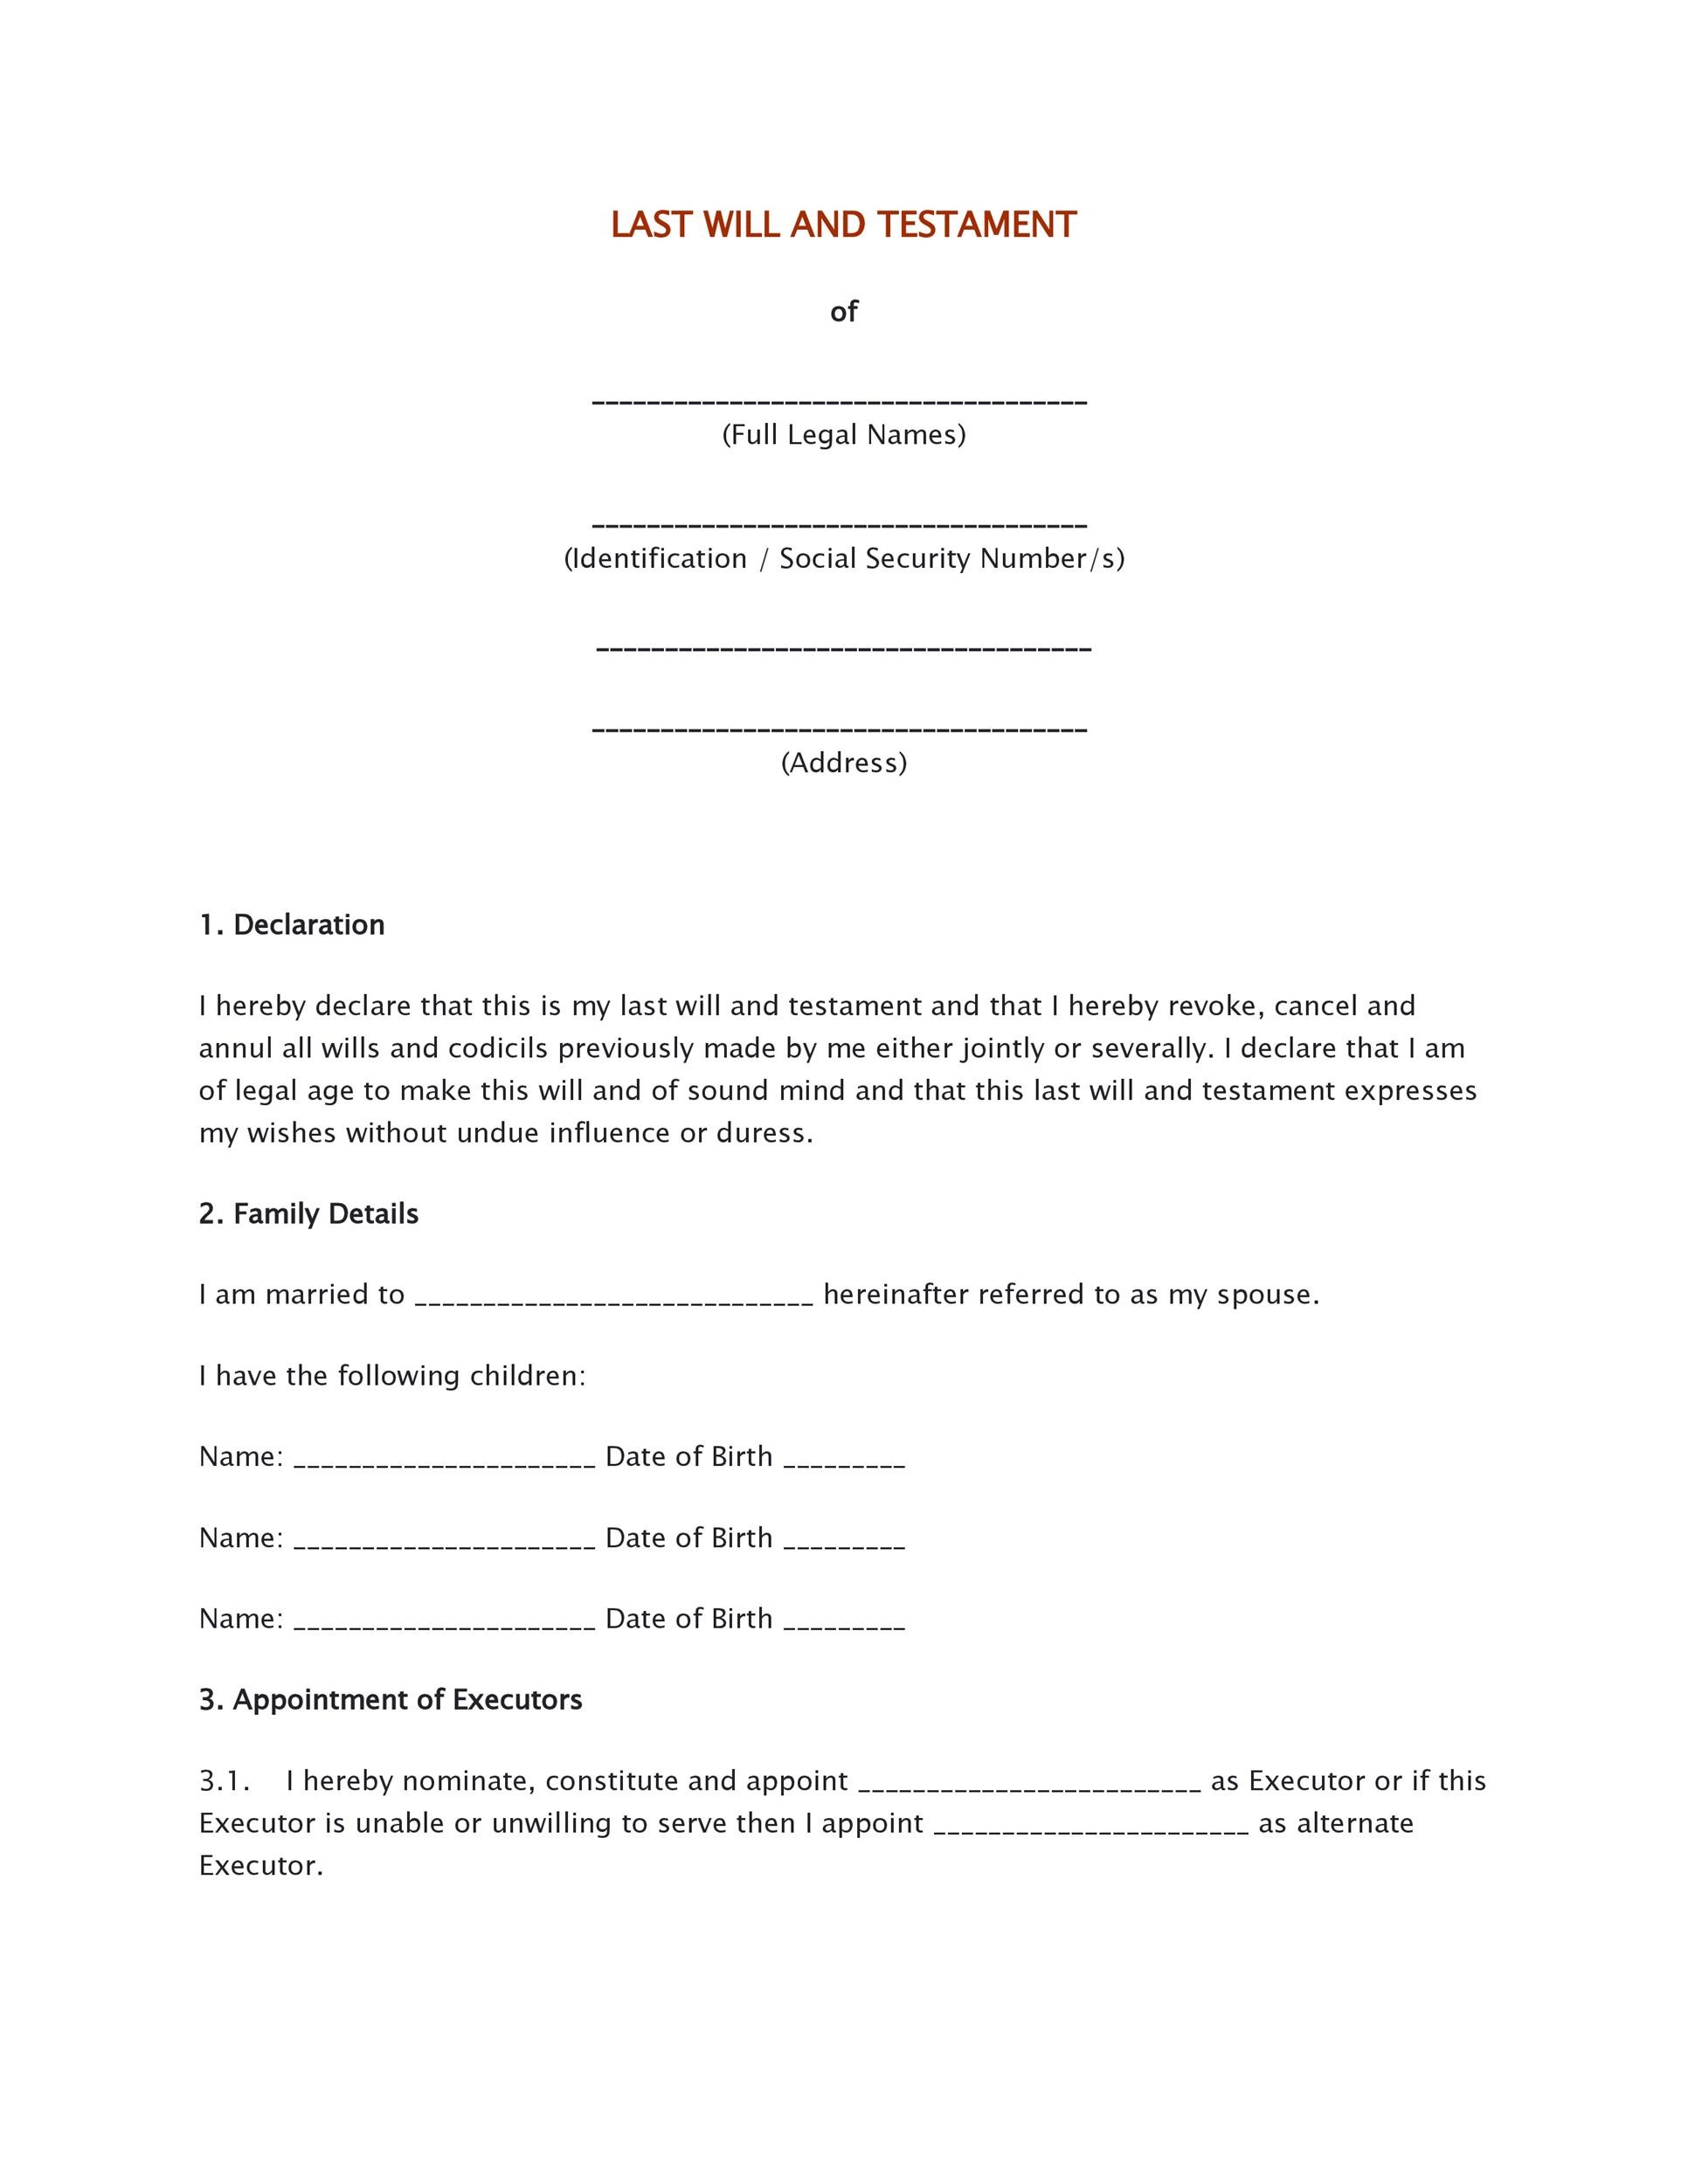 printable-legal-will-tutore-org-master-of-documents